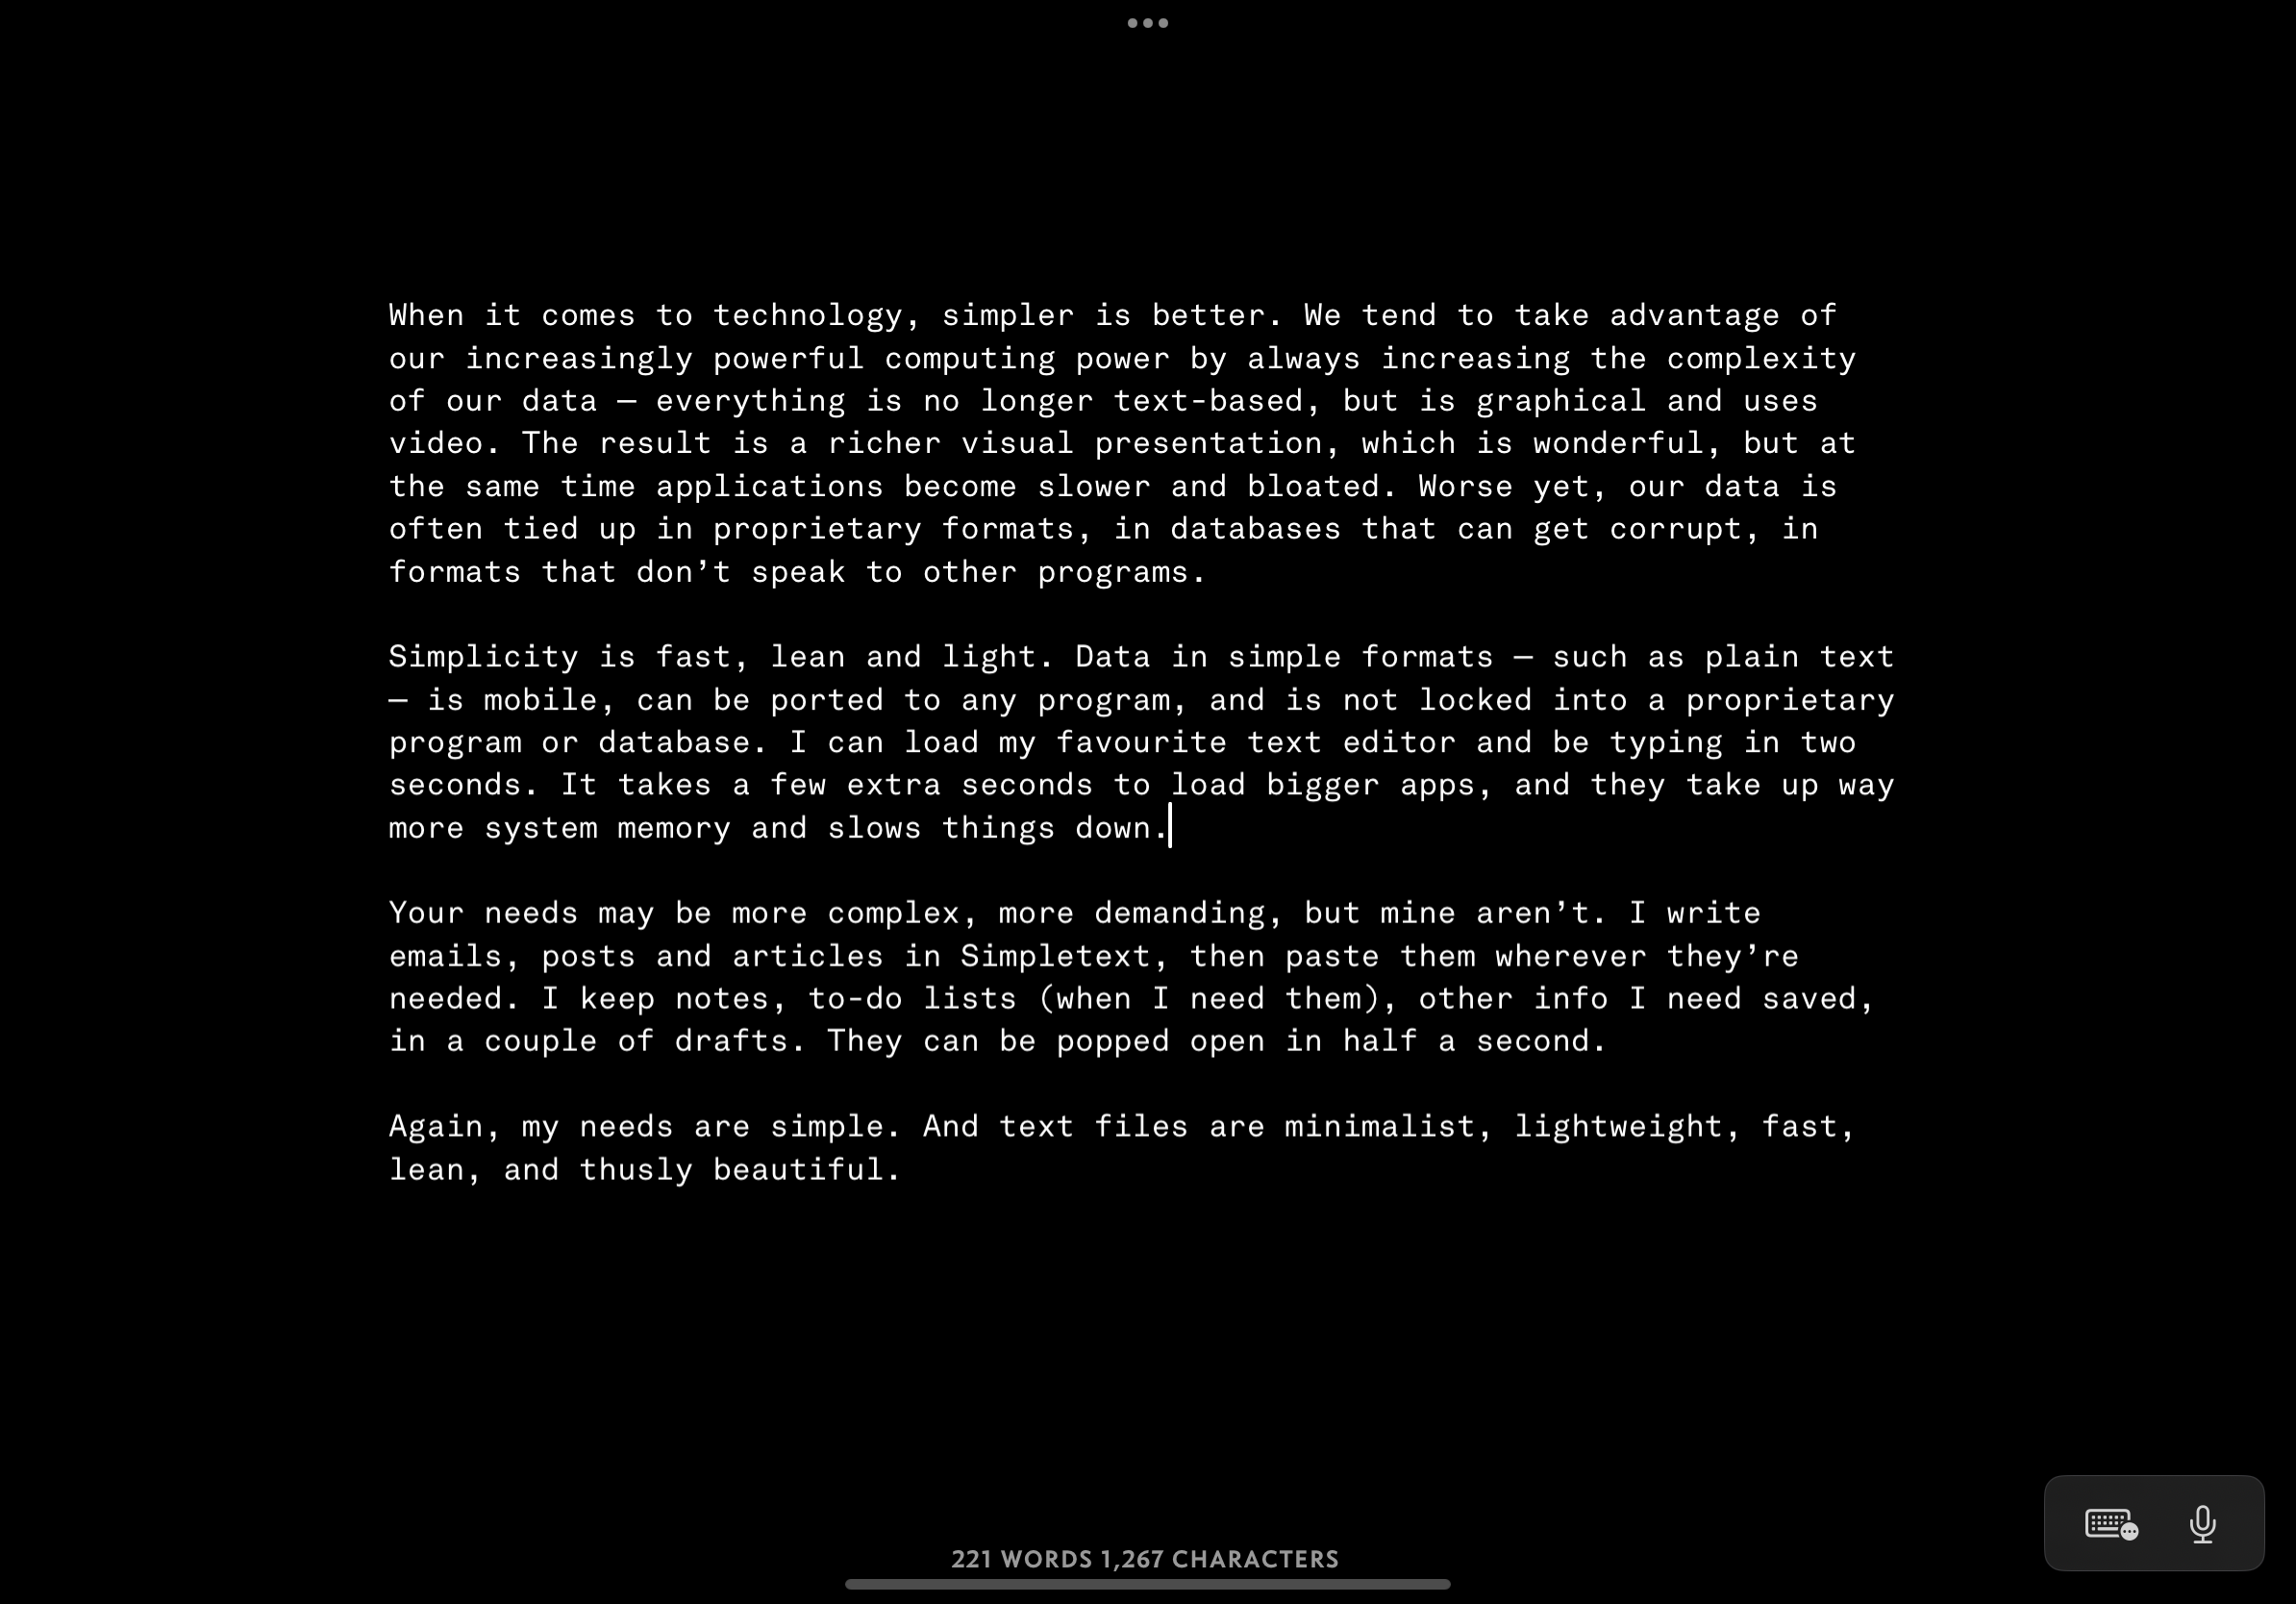 Screenshot of Simpletext on iPad (iOS) with monospaced font in Dark Mode